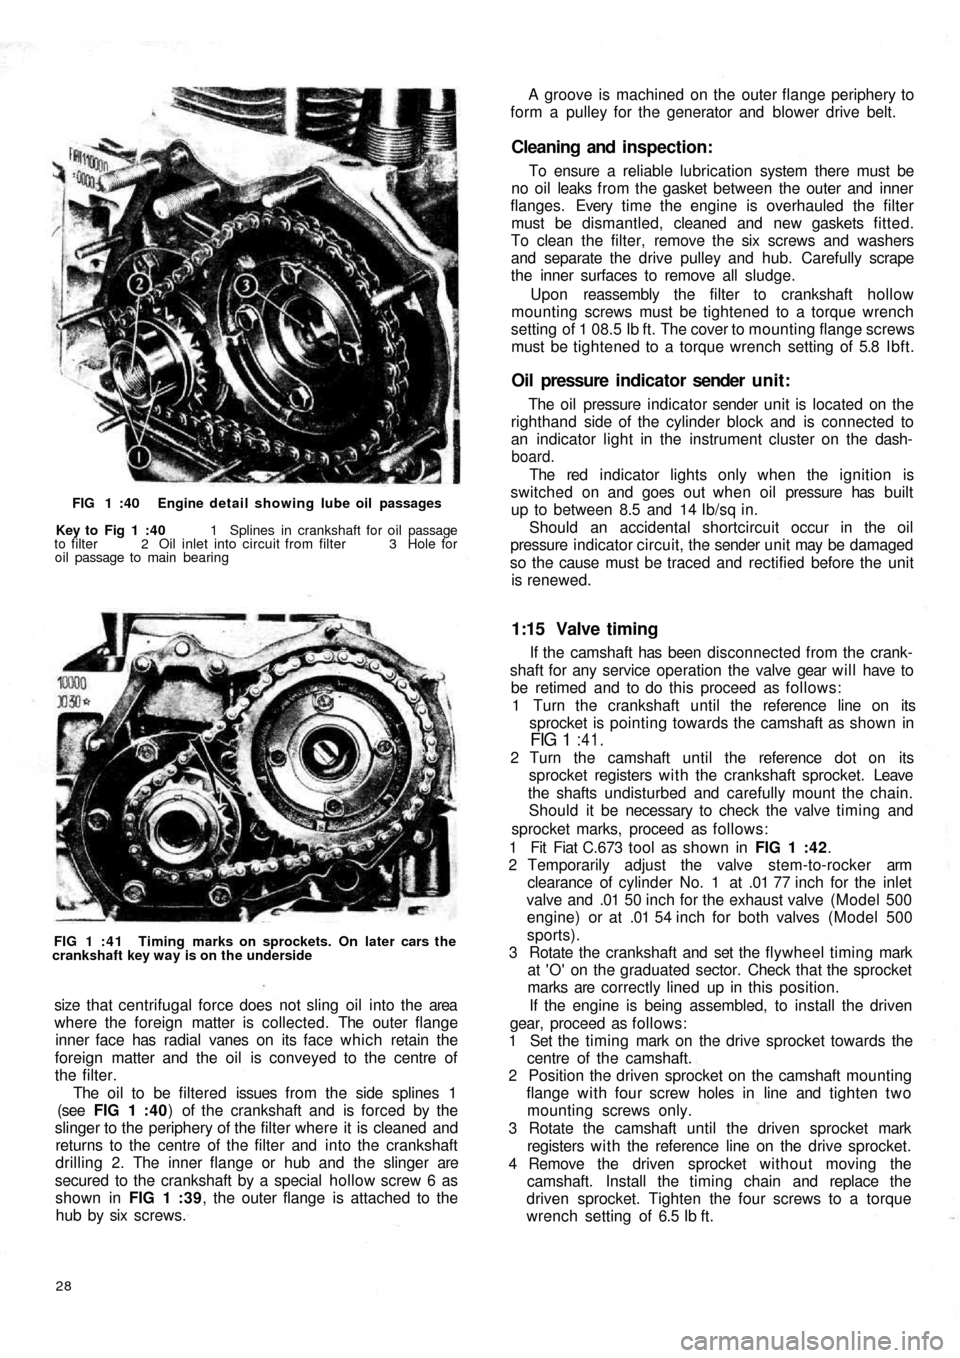 FIAT 500 1959 1.G Workshop Manual FIG 1 :40  Engine detail showing lube oil passages
Key to Fig 1 :40  1  Splines in crankshaft for oil passage
to filter  2  Oil inlet into circuit from filter 3 Hole for
oil passage to main bearing
FI